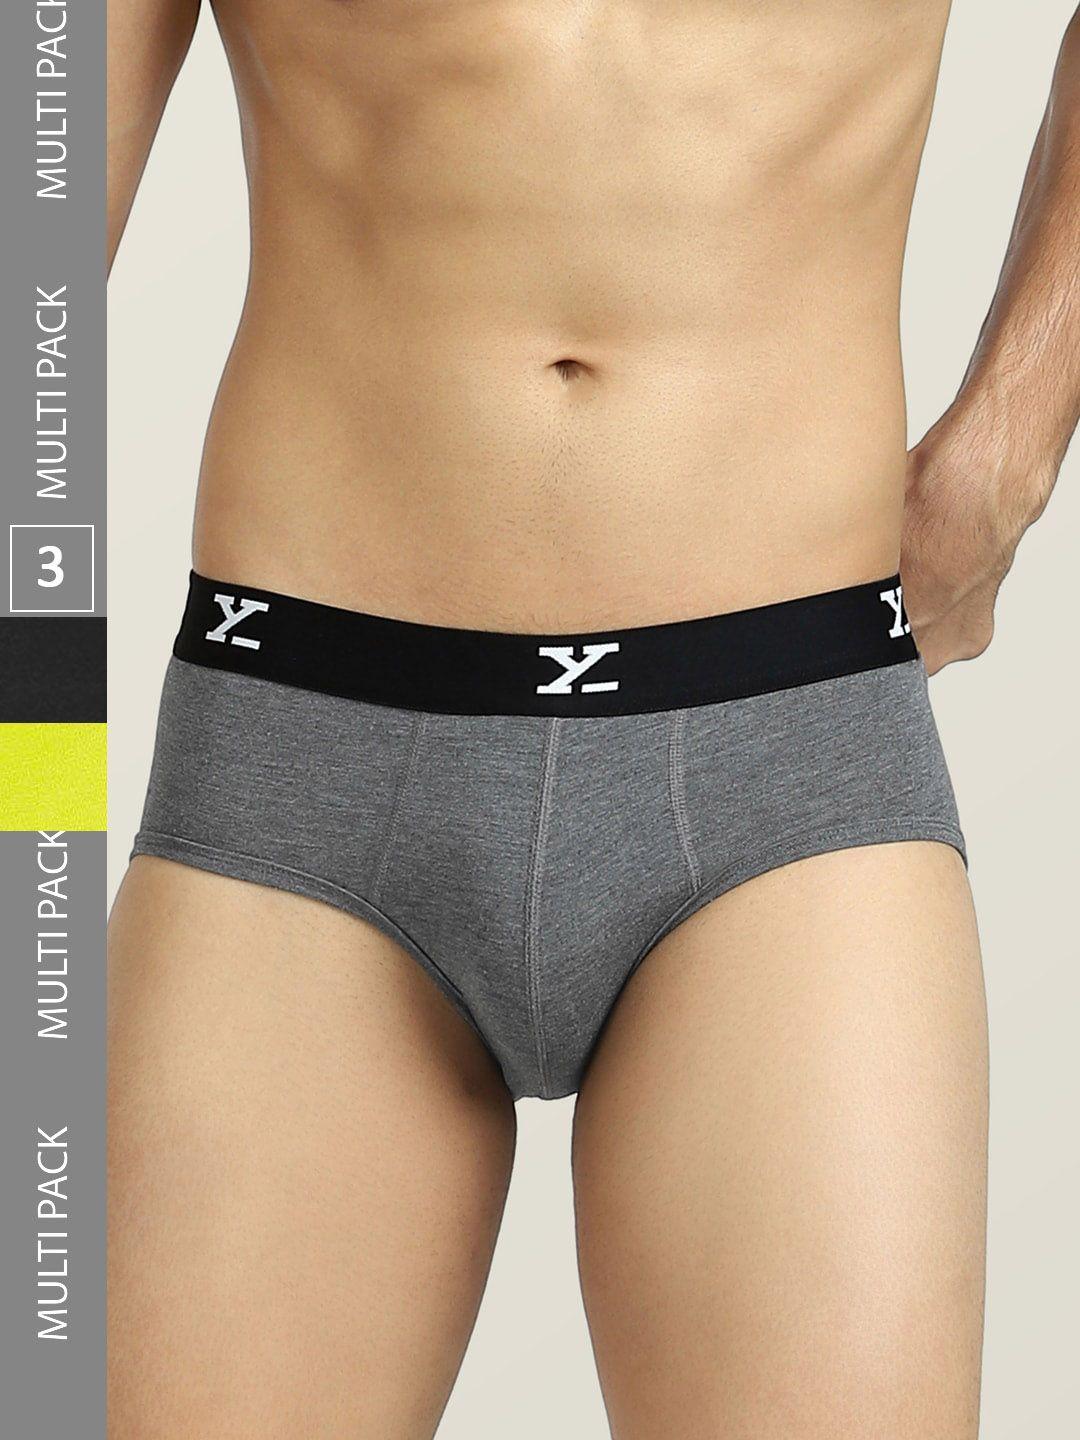 xyxx men pack of 3 antimicrobial basic briefs